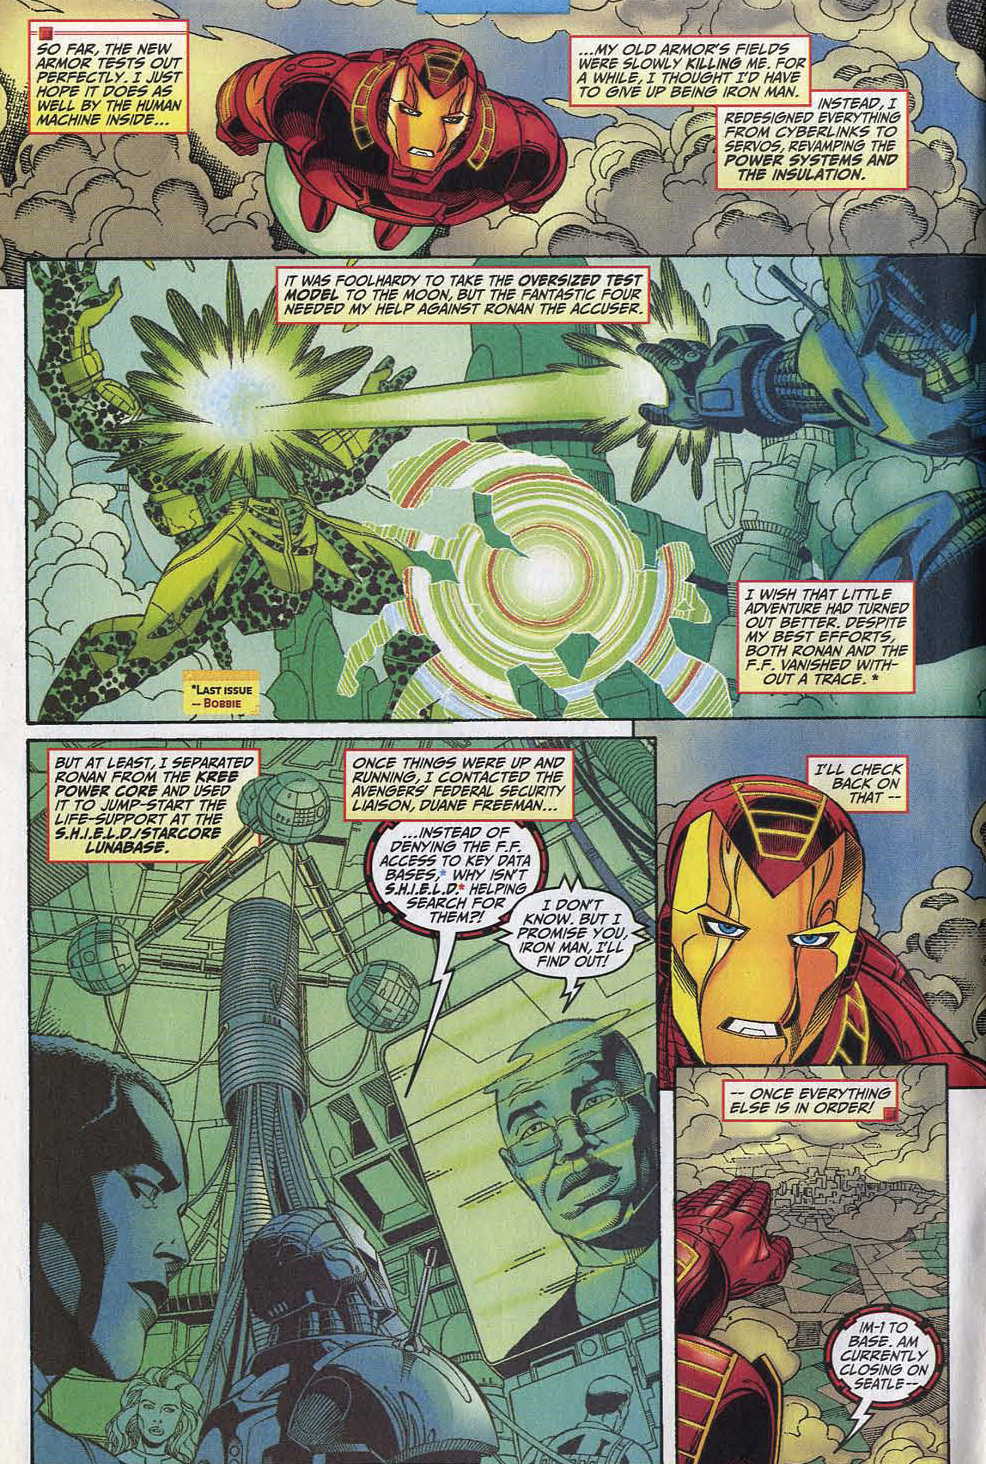 Iron Man (1998) issue 15 - Page 5